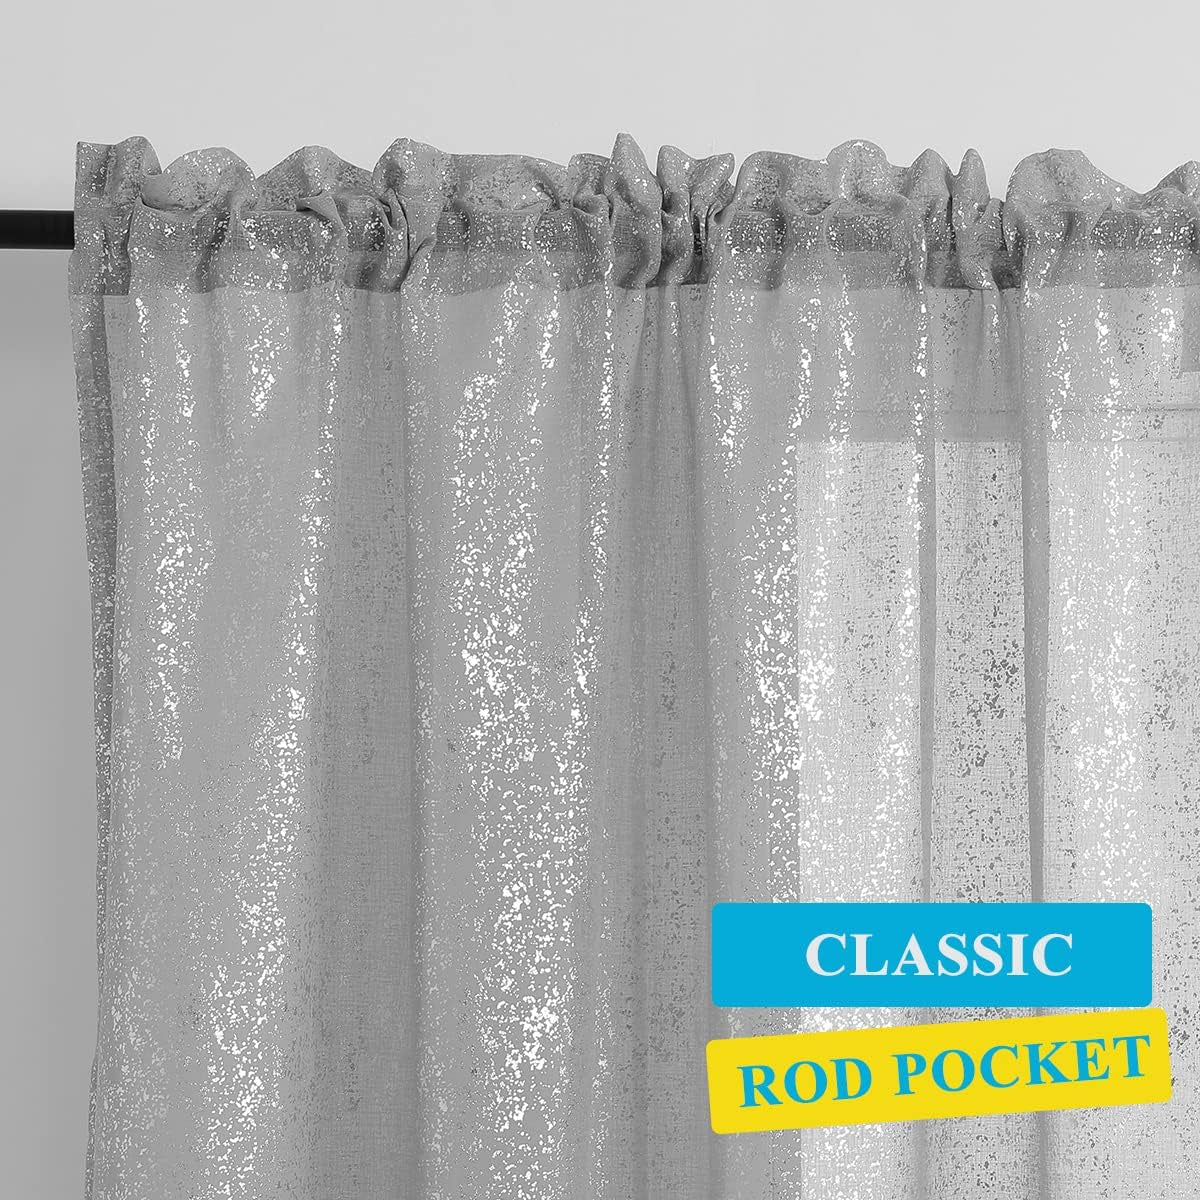 Silver Sheer Curtains 84 Inch Long - Chic Sparkle Curtains for Living Room, Rod Pocket Glitter Sheer Curtains for Windows Privacy Silver Grey Sheer Panels, 52 X 84 Inch, 2 Panels, Silver Gray  TERLYTEX   